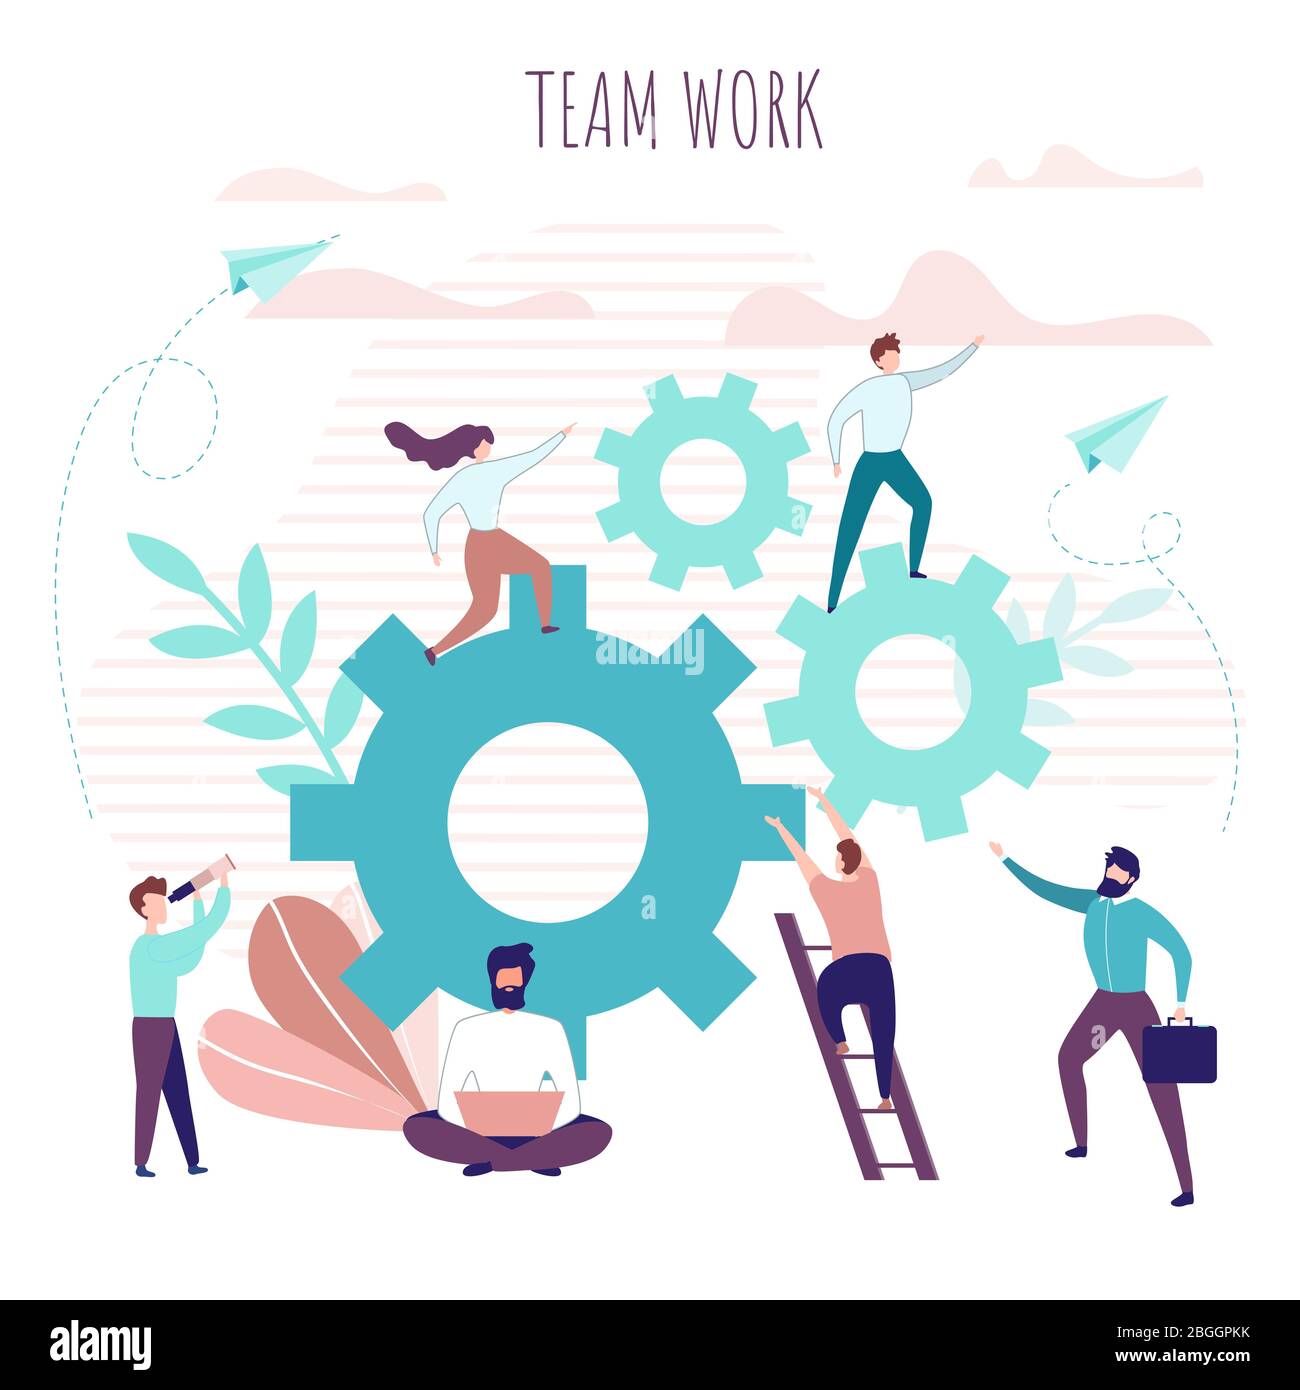 Teamwork Poster with Collaborating Office People. Man and Woman Coworkers Community Work on Business Project, Search Solutions Together. Vector Metaph Stock Vector